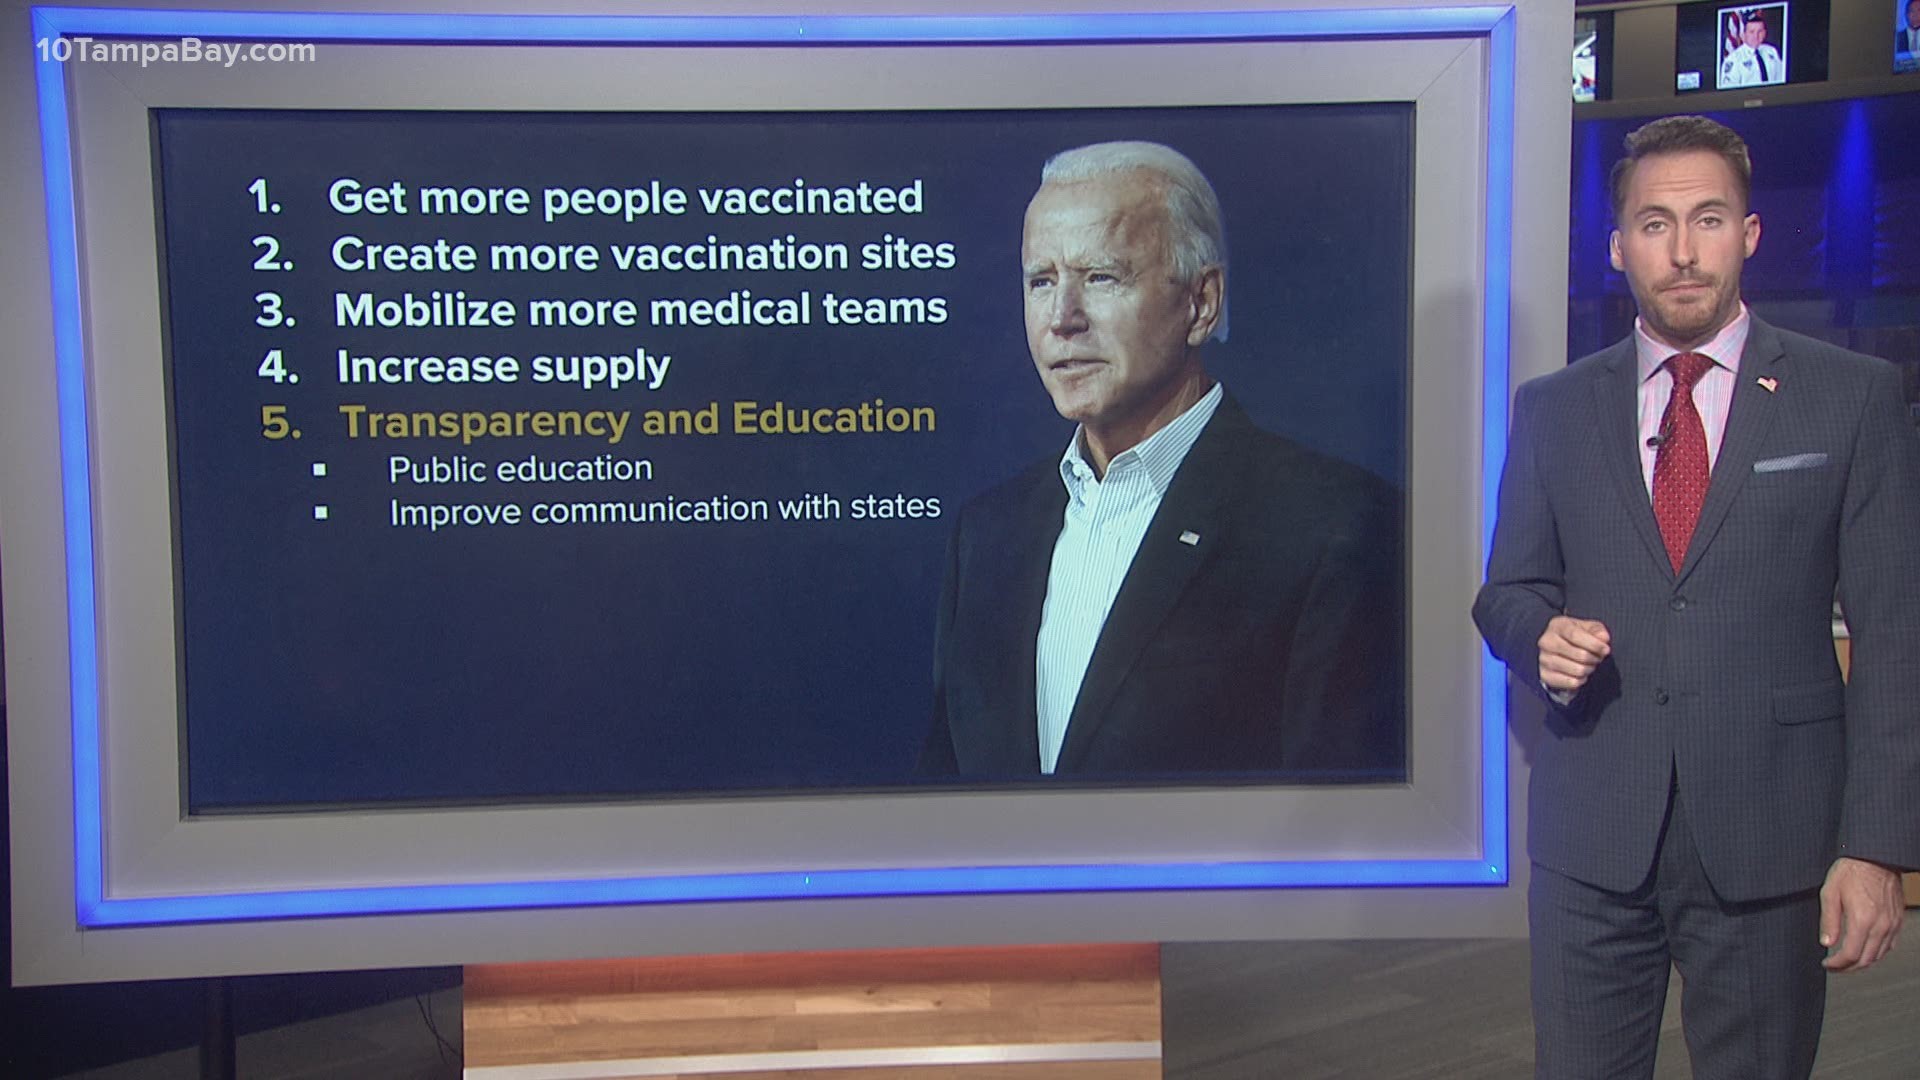 President-elect Joe Biden says he'll use the Cold War-era law for his goal of administering 100 million COVID-19 vaccines by his 100th day in office.